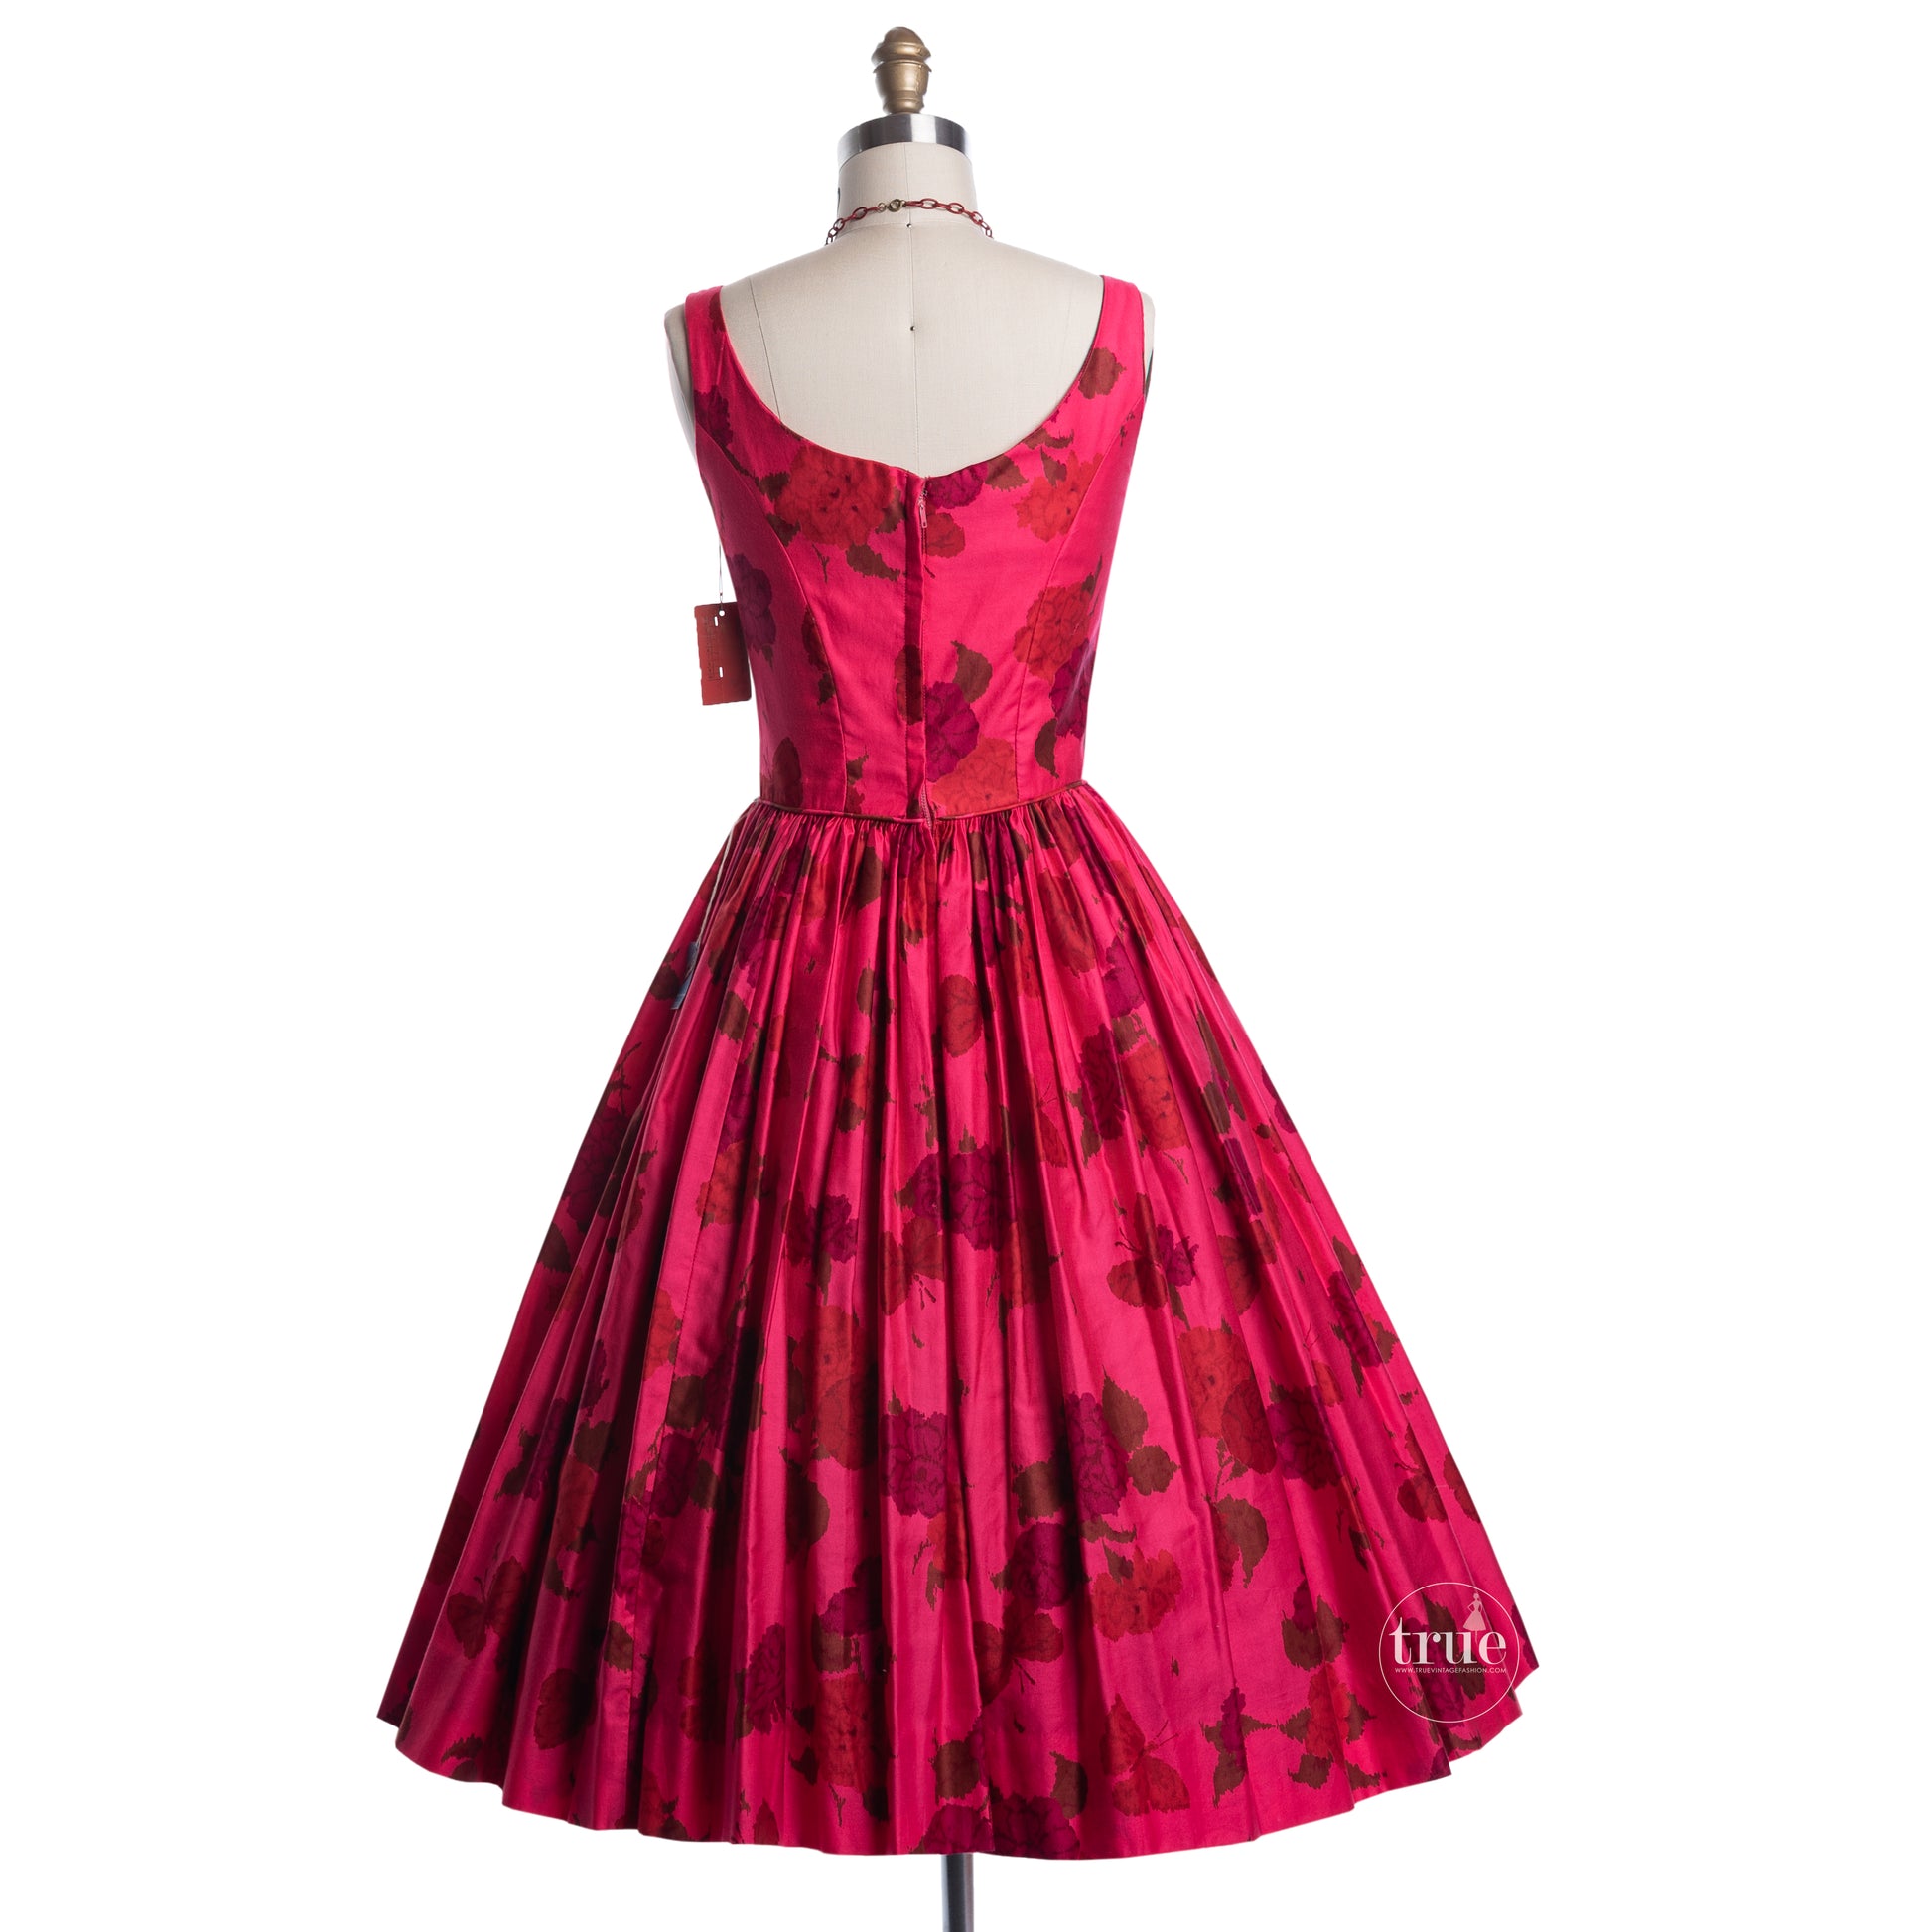 vintage 1950's dress styled by jack needleman cotton floral deadstock